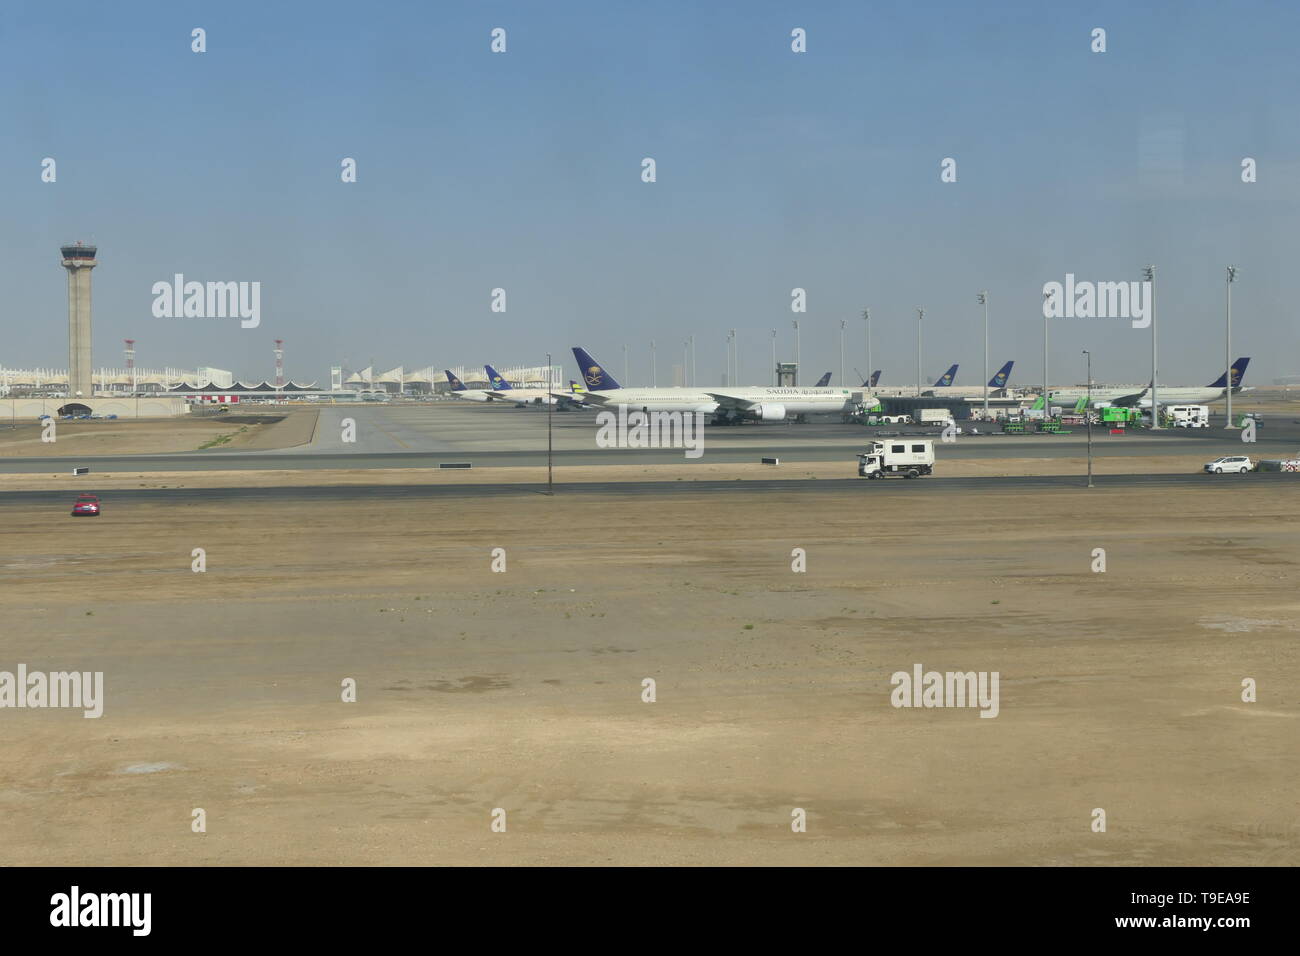 JEDDAH, SAUDI ARABIA - DECEMBER 22, 2018: View over the rollfield of the King Abdulaziz International Airport with SAUDIA Airplanes in the background Stock Photo